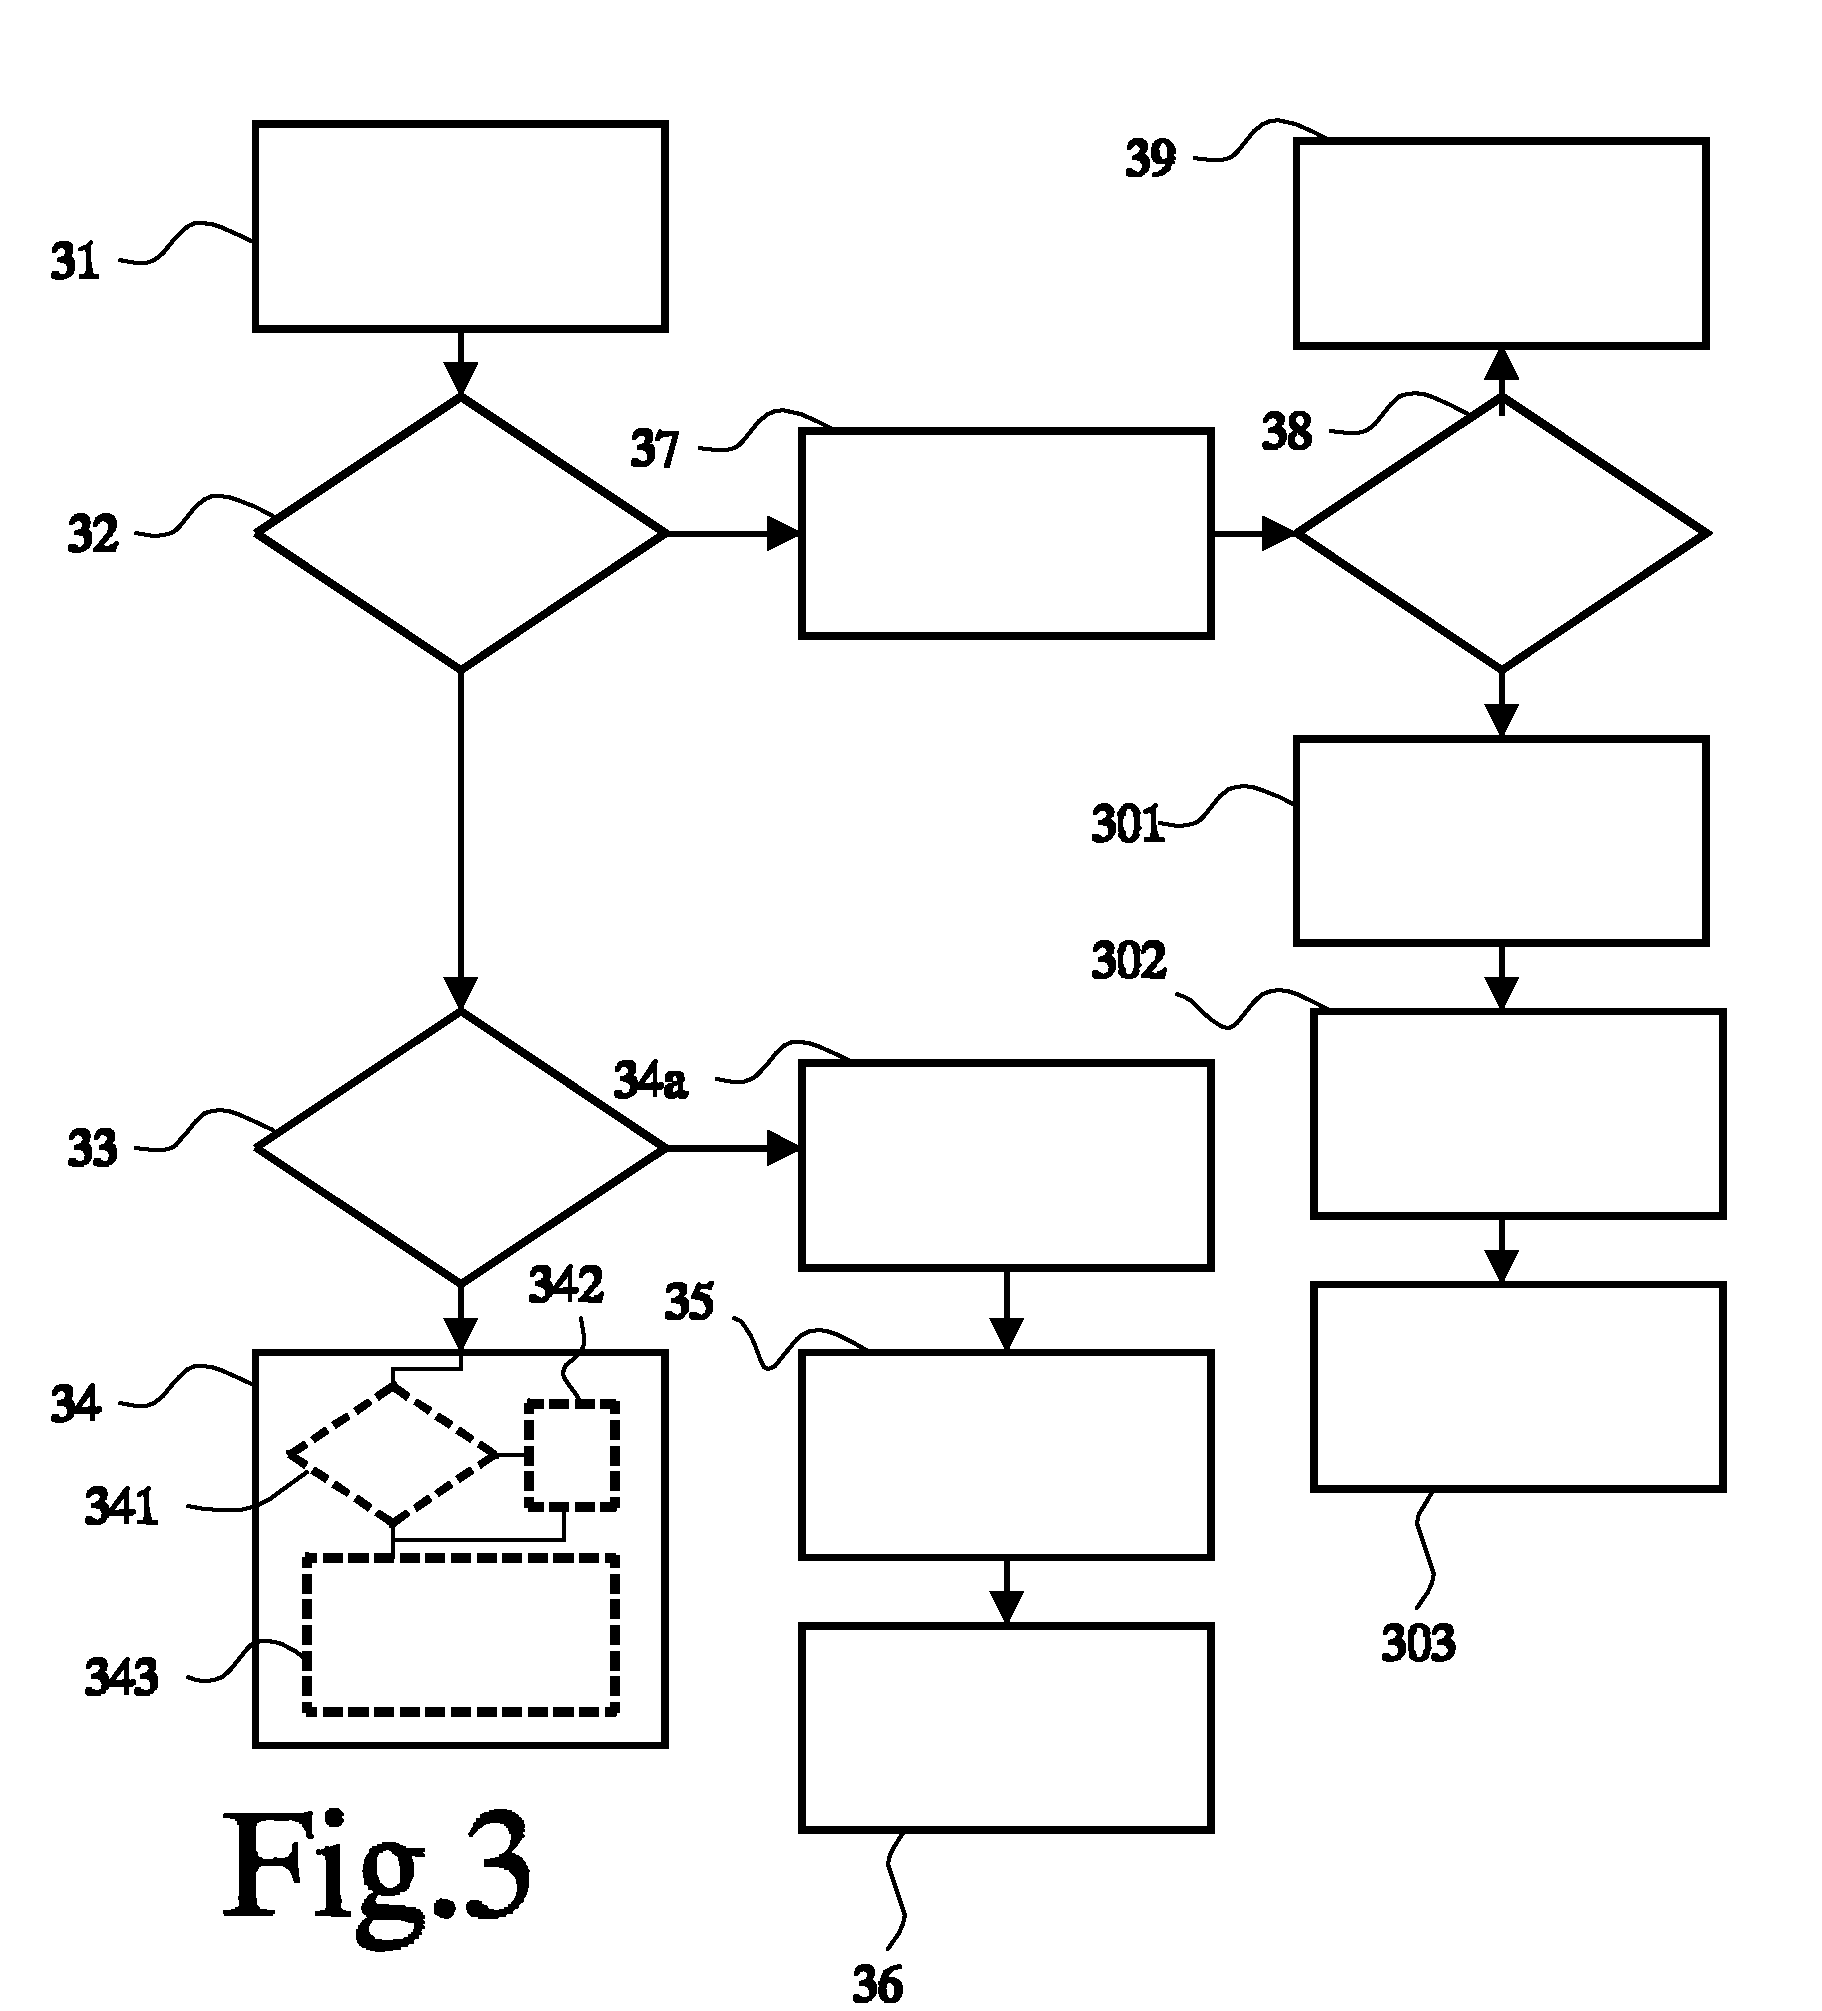 Multiprocessing circuit with cache circuits that allow writing to not previously loaded cache lines